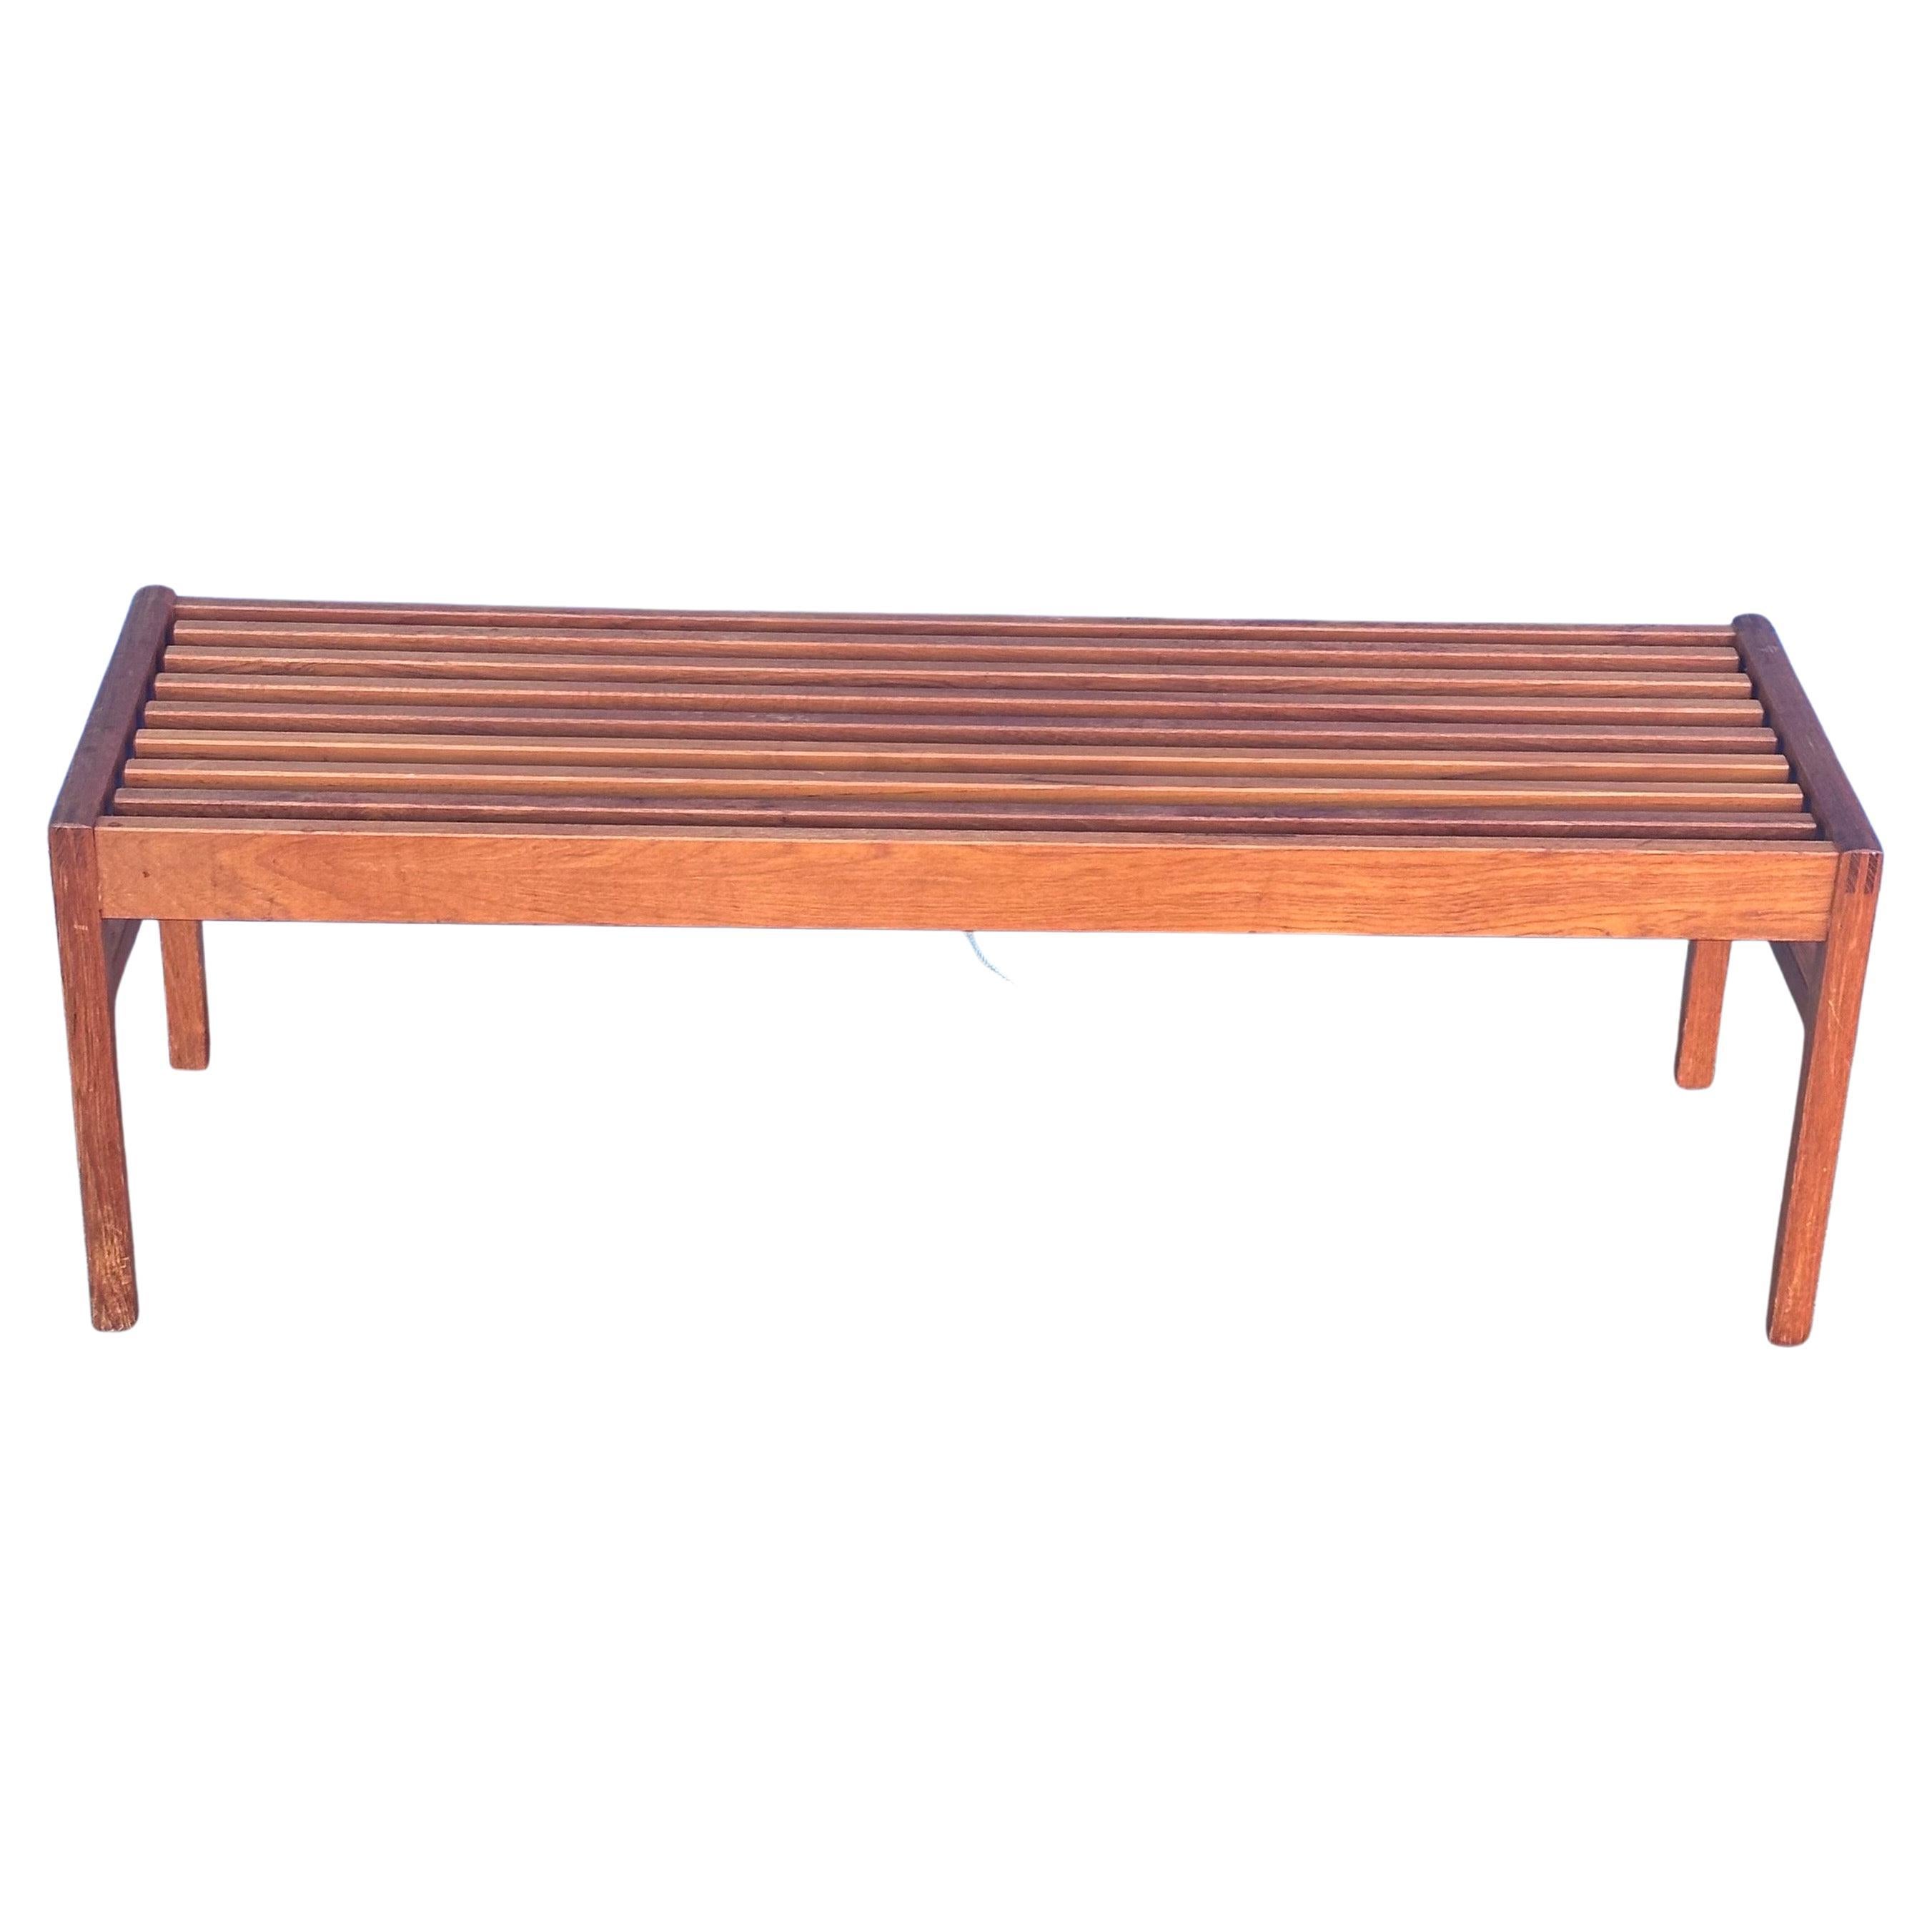 Gorgeous Danish modern solid teak slat bench / coffee table by Lysgaard Mobler, circa 1960s.  The bench is in very good vintage condition and measures 49.75